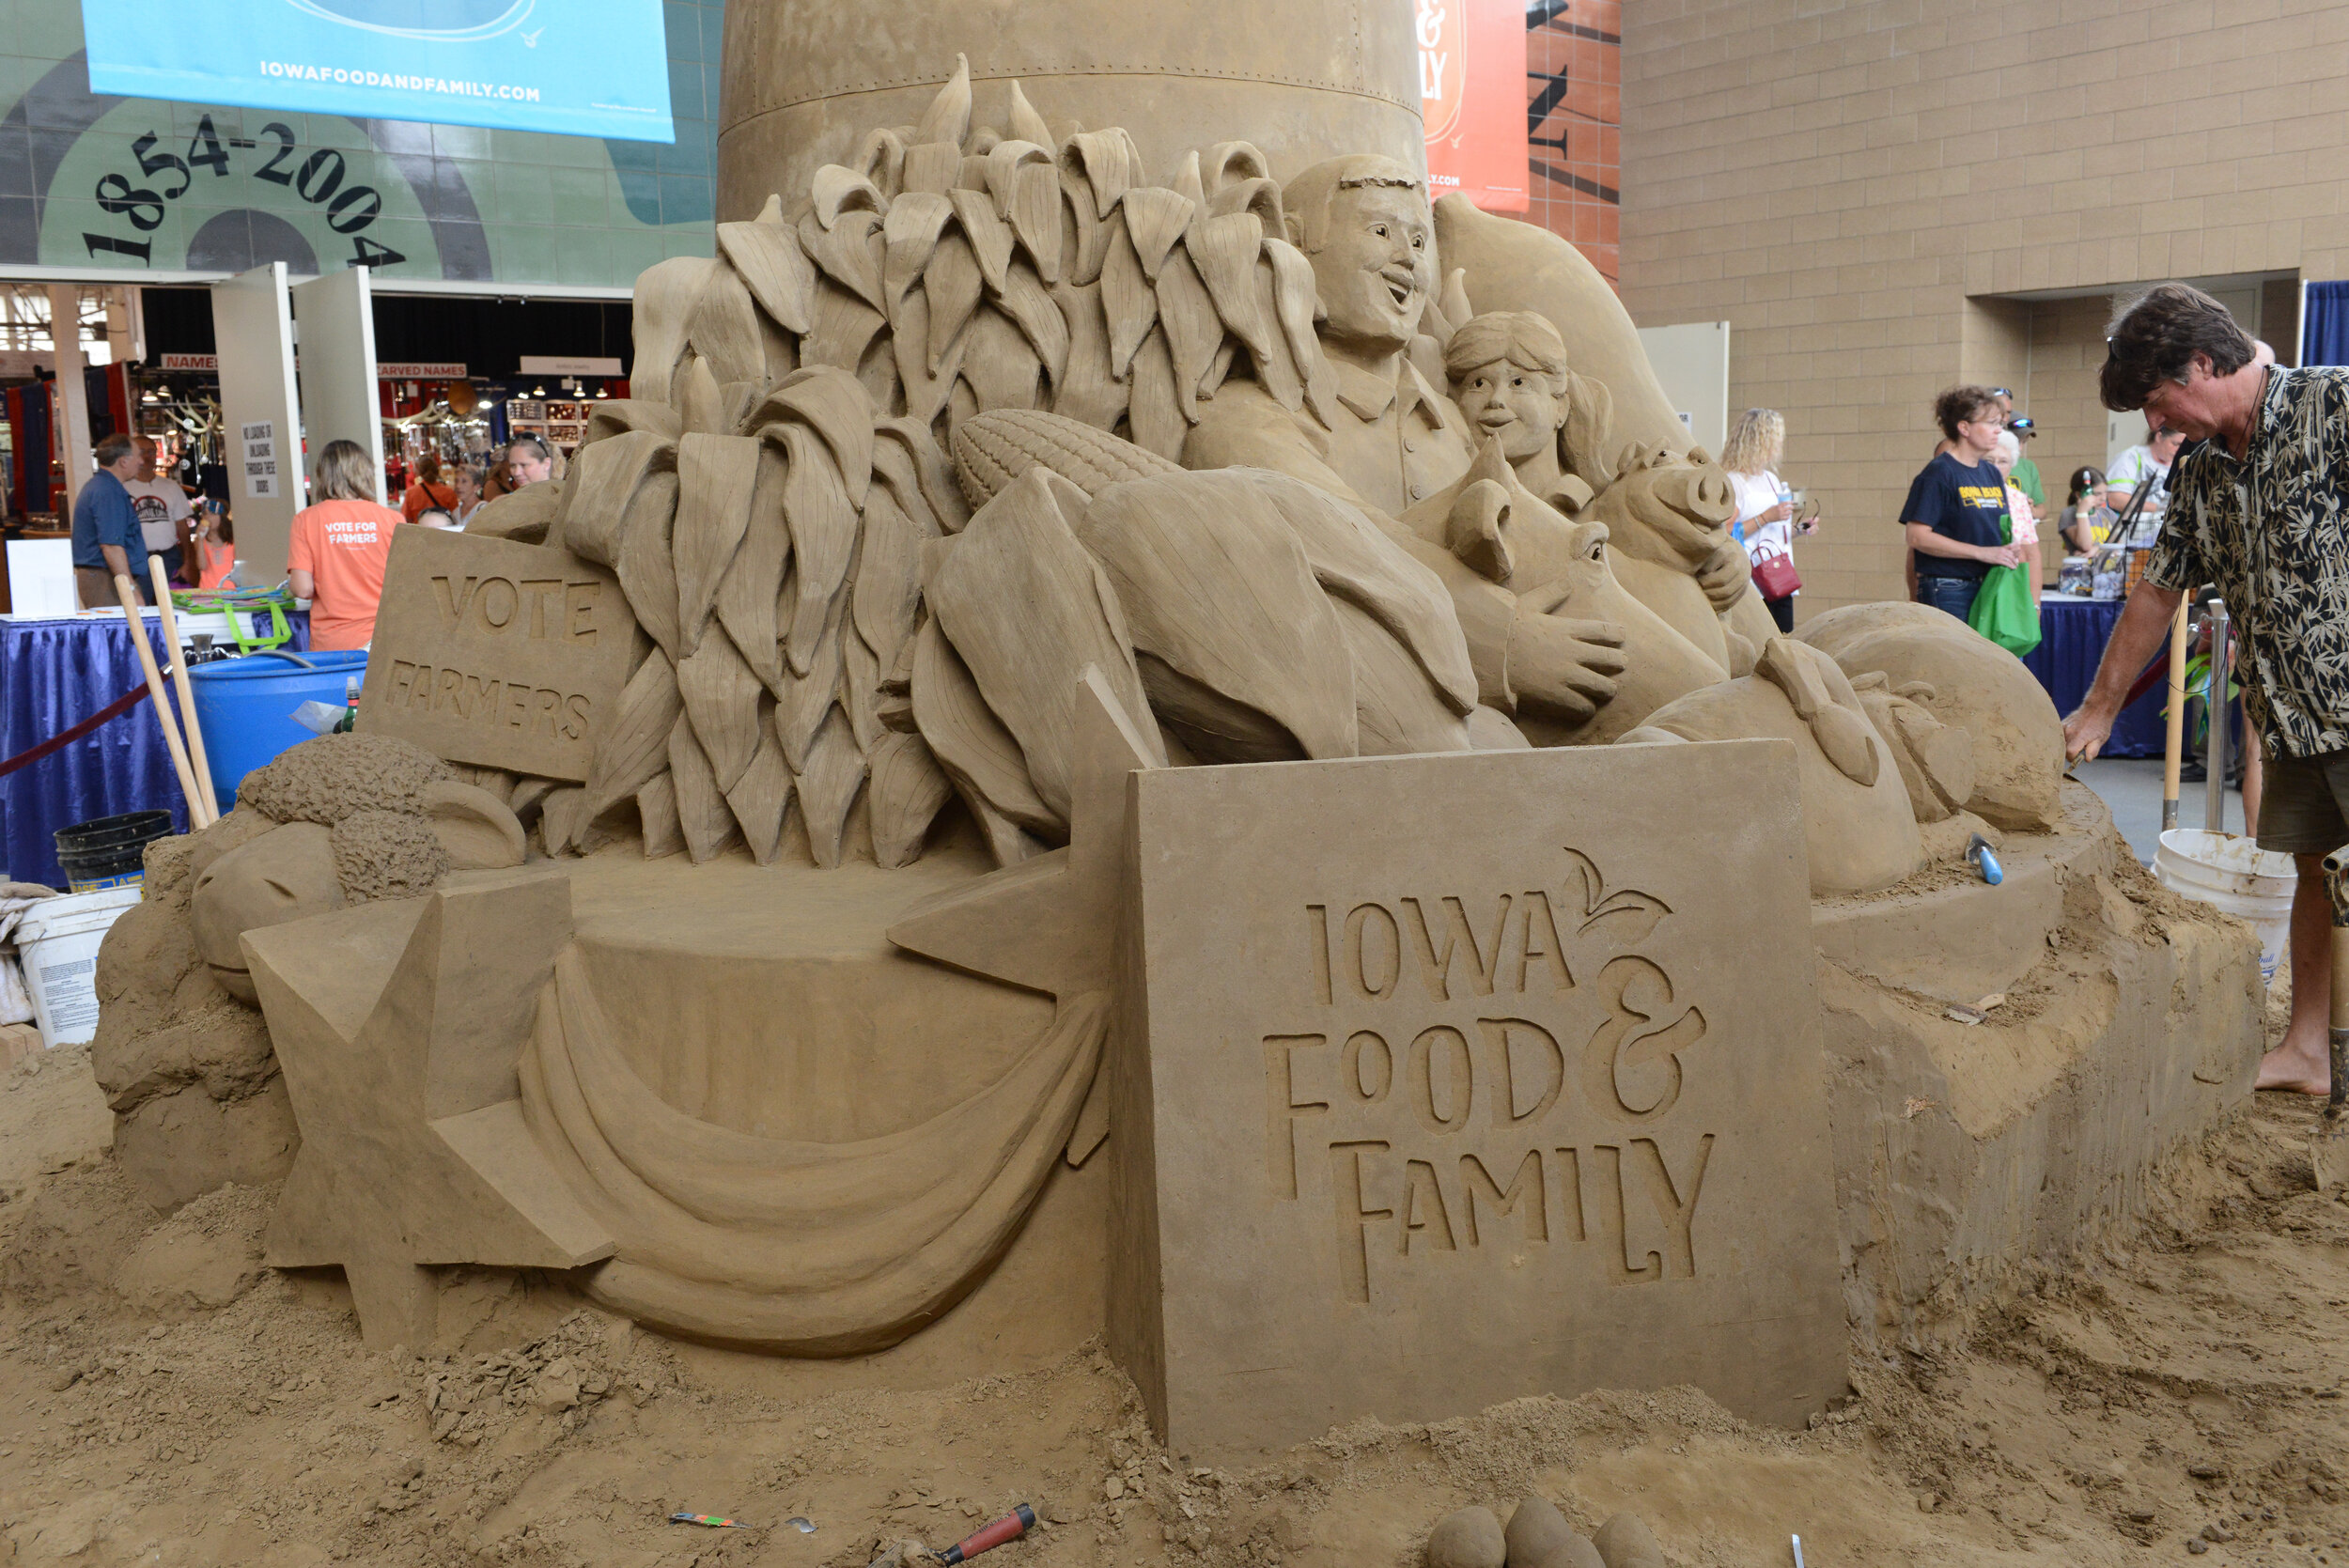 The 2014 Sandscape sculpture was created from 50 tons of sand.